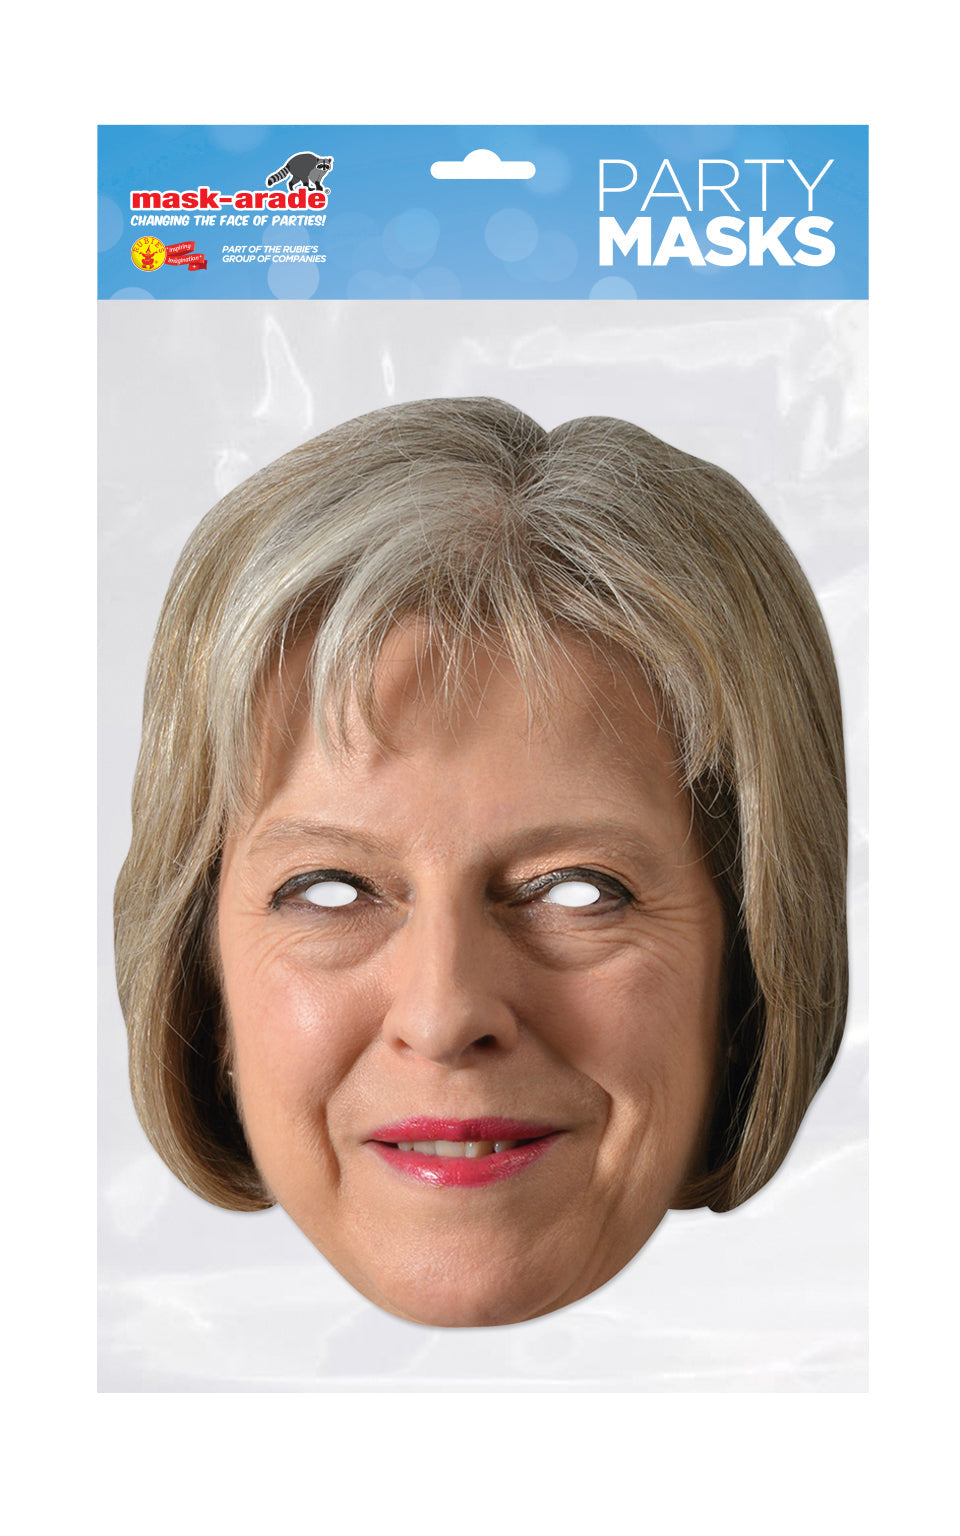 Theresa May Celebrity Face Mask. Life size card face mask comes with eye holes and elastic fastening.